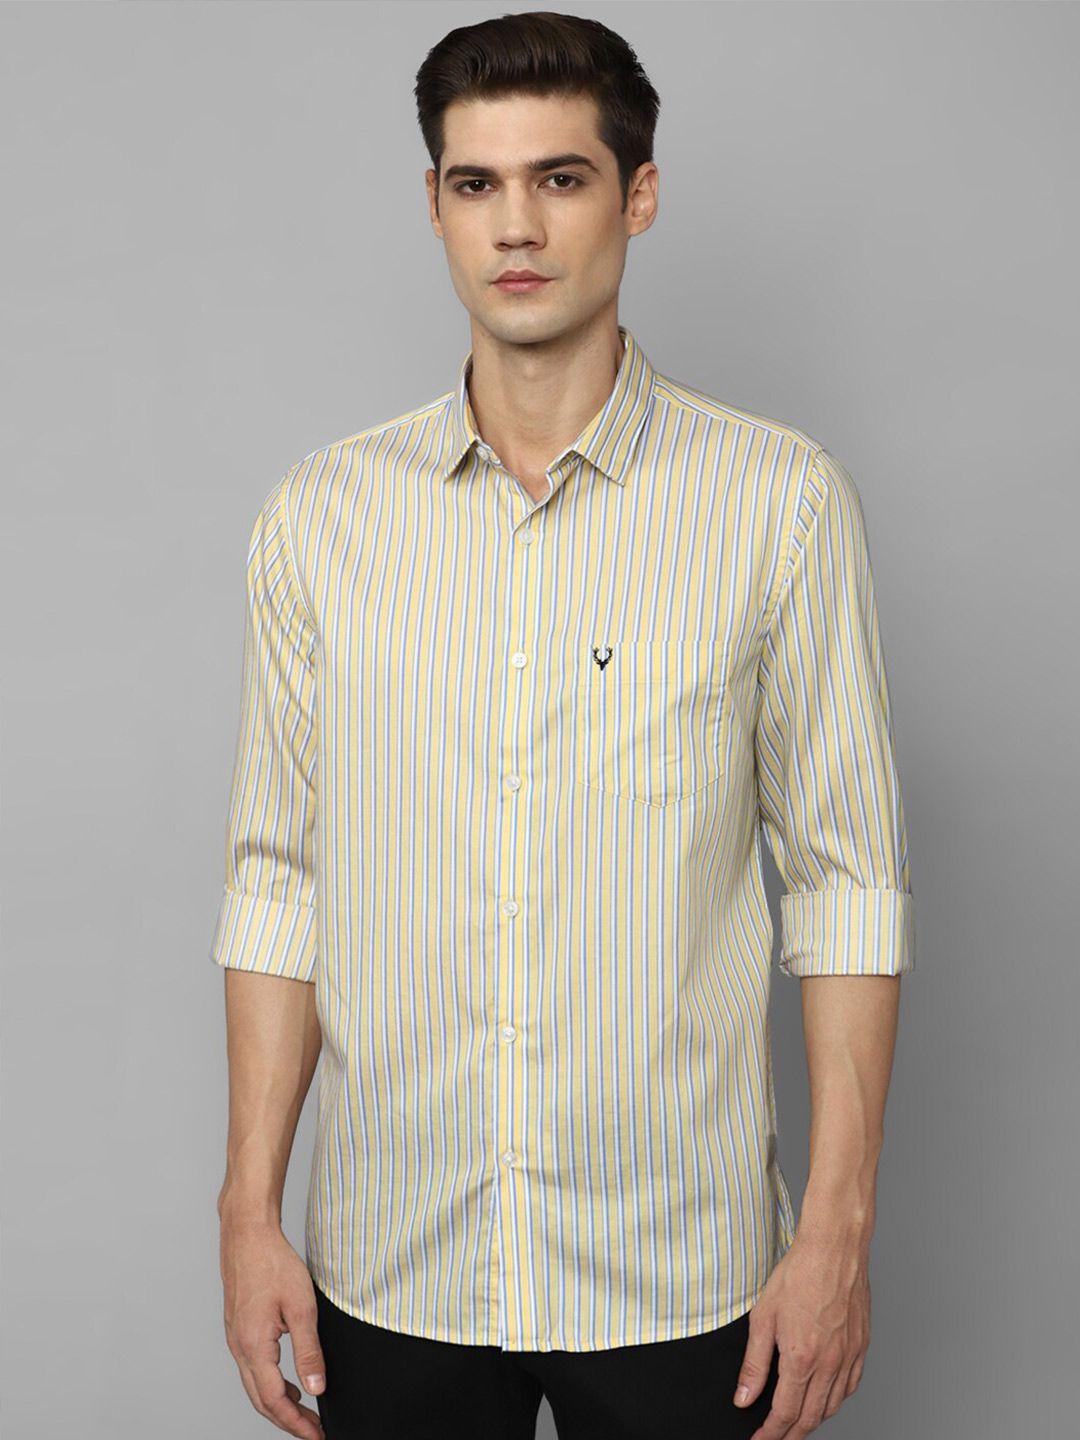 allen solly slim fit striped pure cotton casual shirt